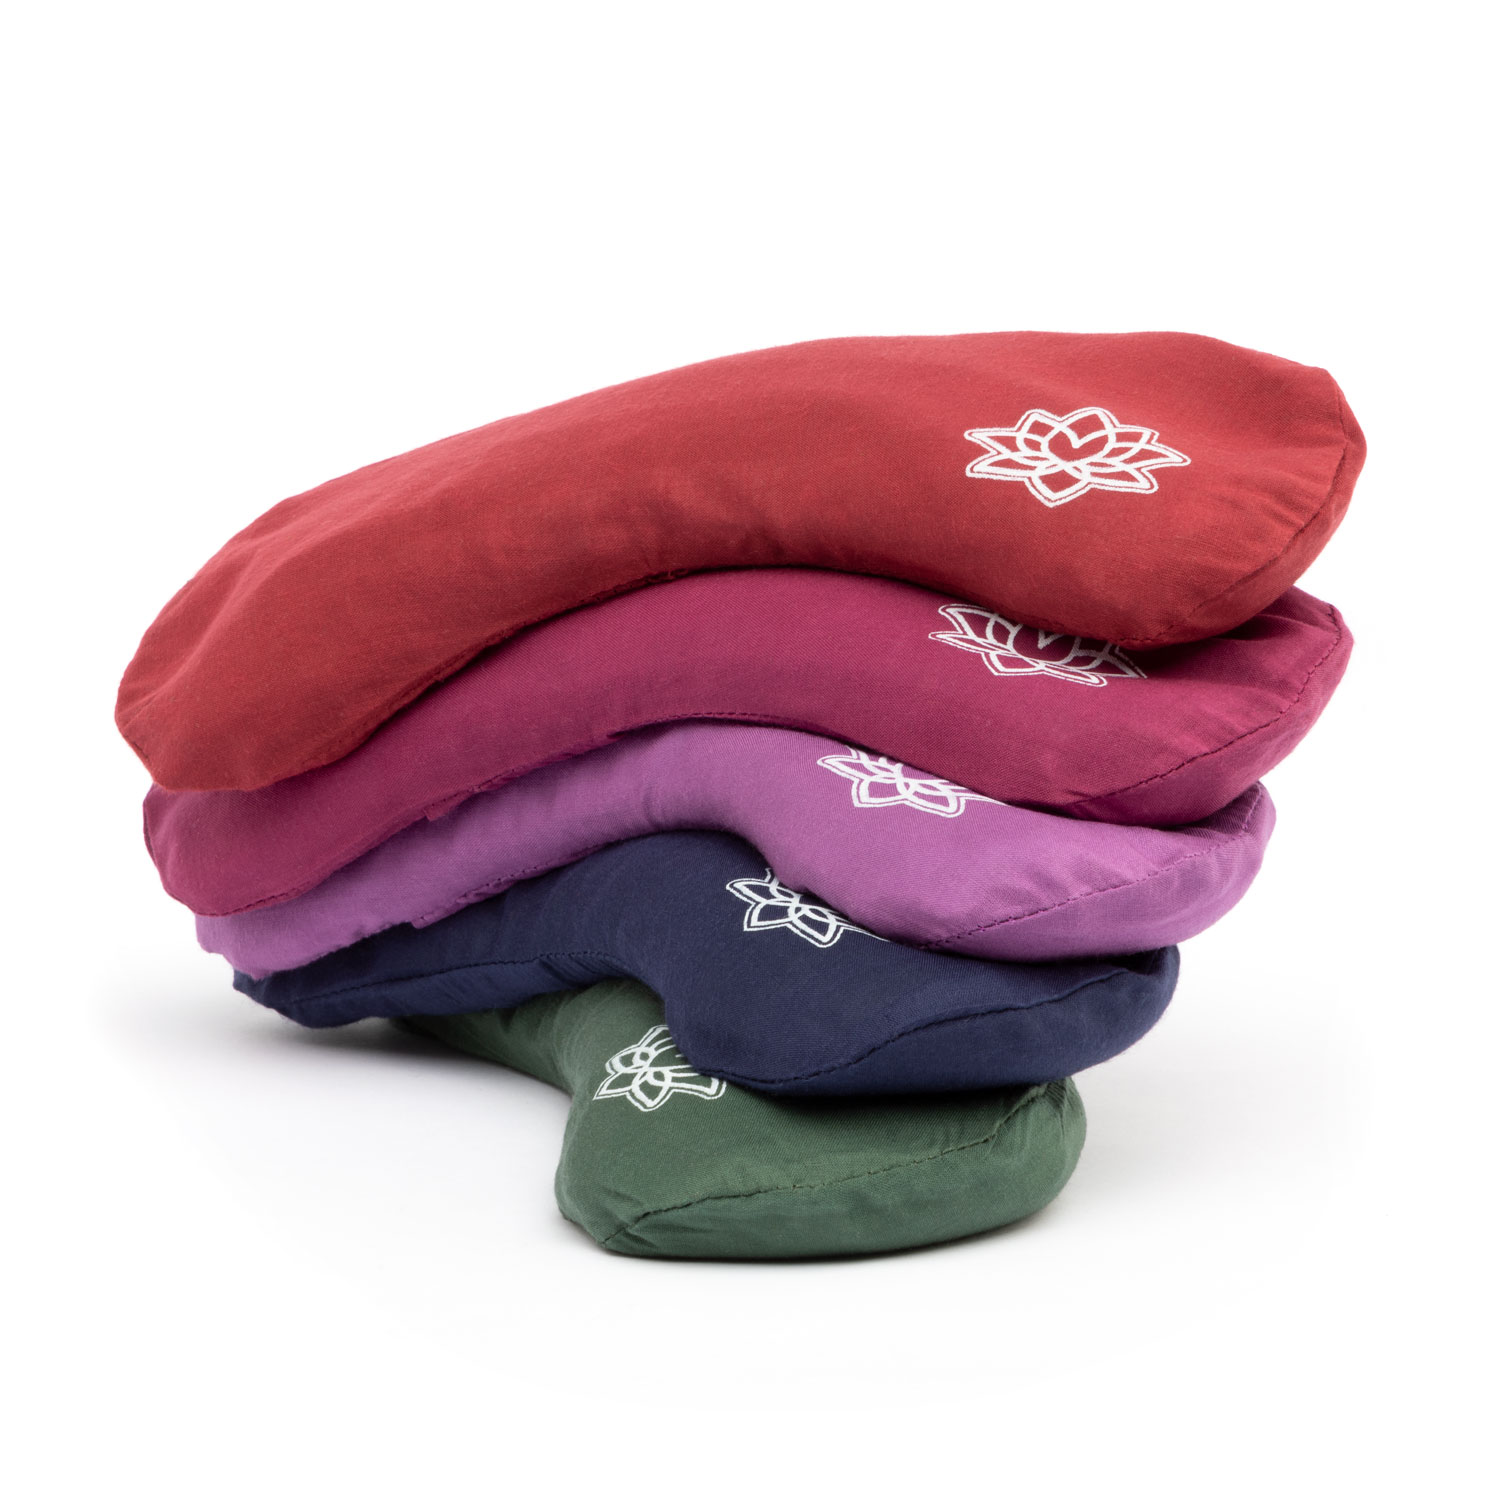 Bodhi Soft Eye Pillow with Lavender Linseed Filling for Yoga Relaxation & Meditation Wine Red, Lotus 